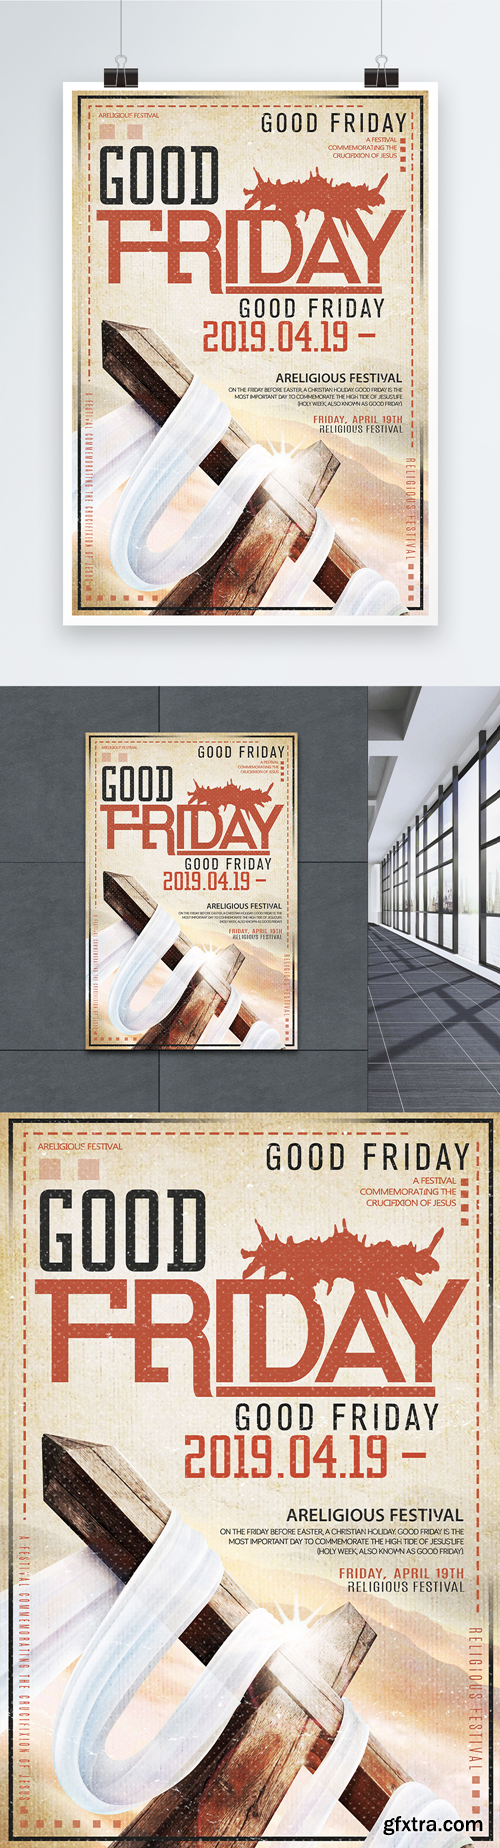 english posters for good friday